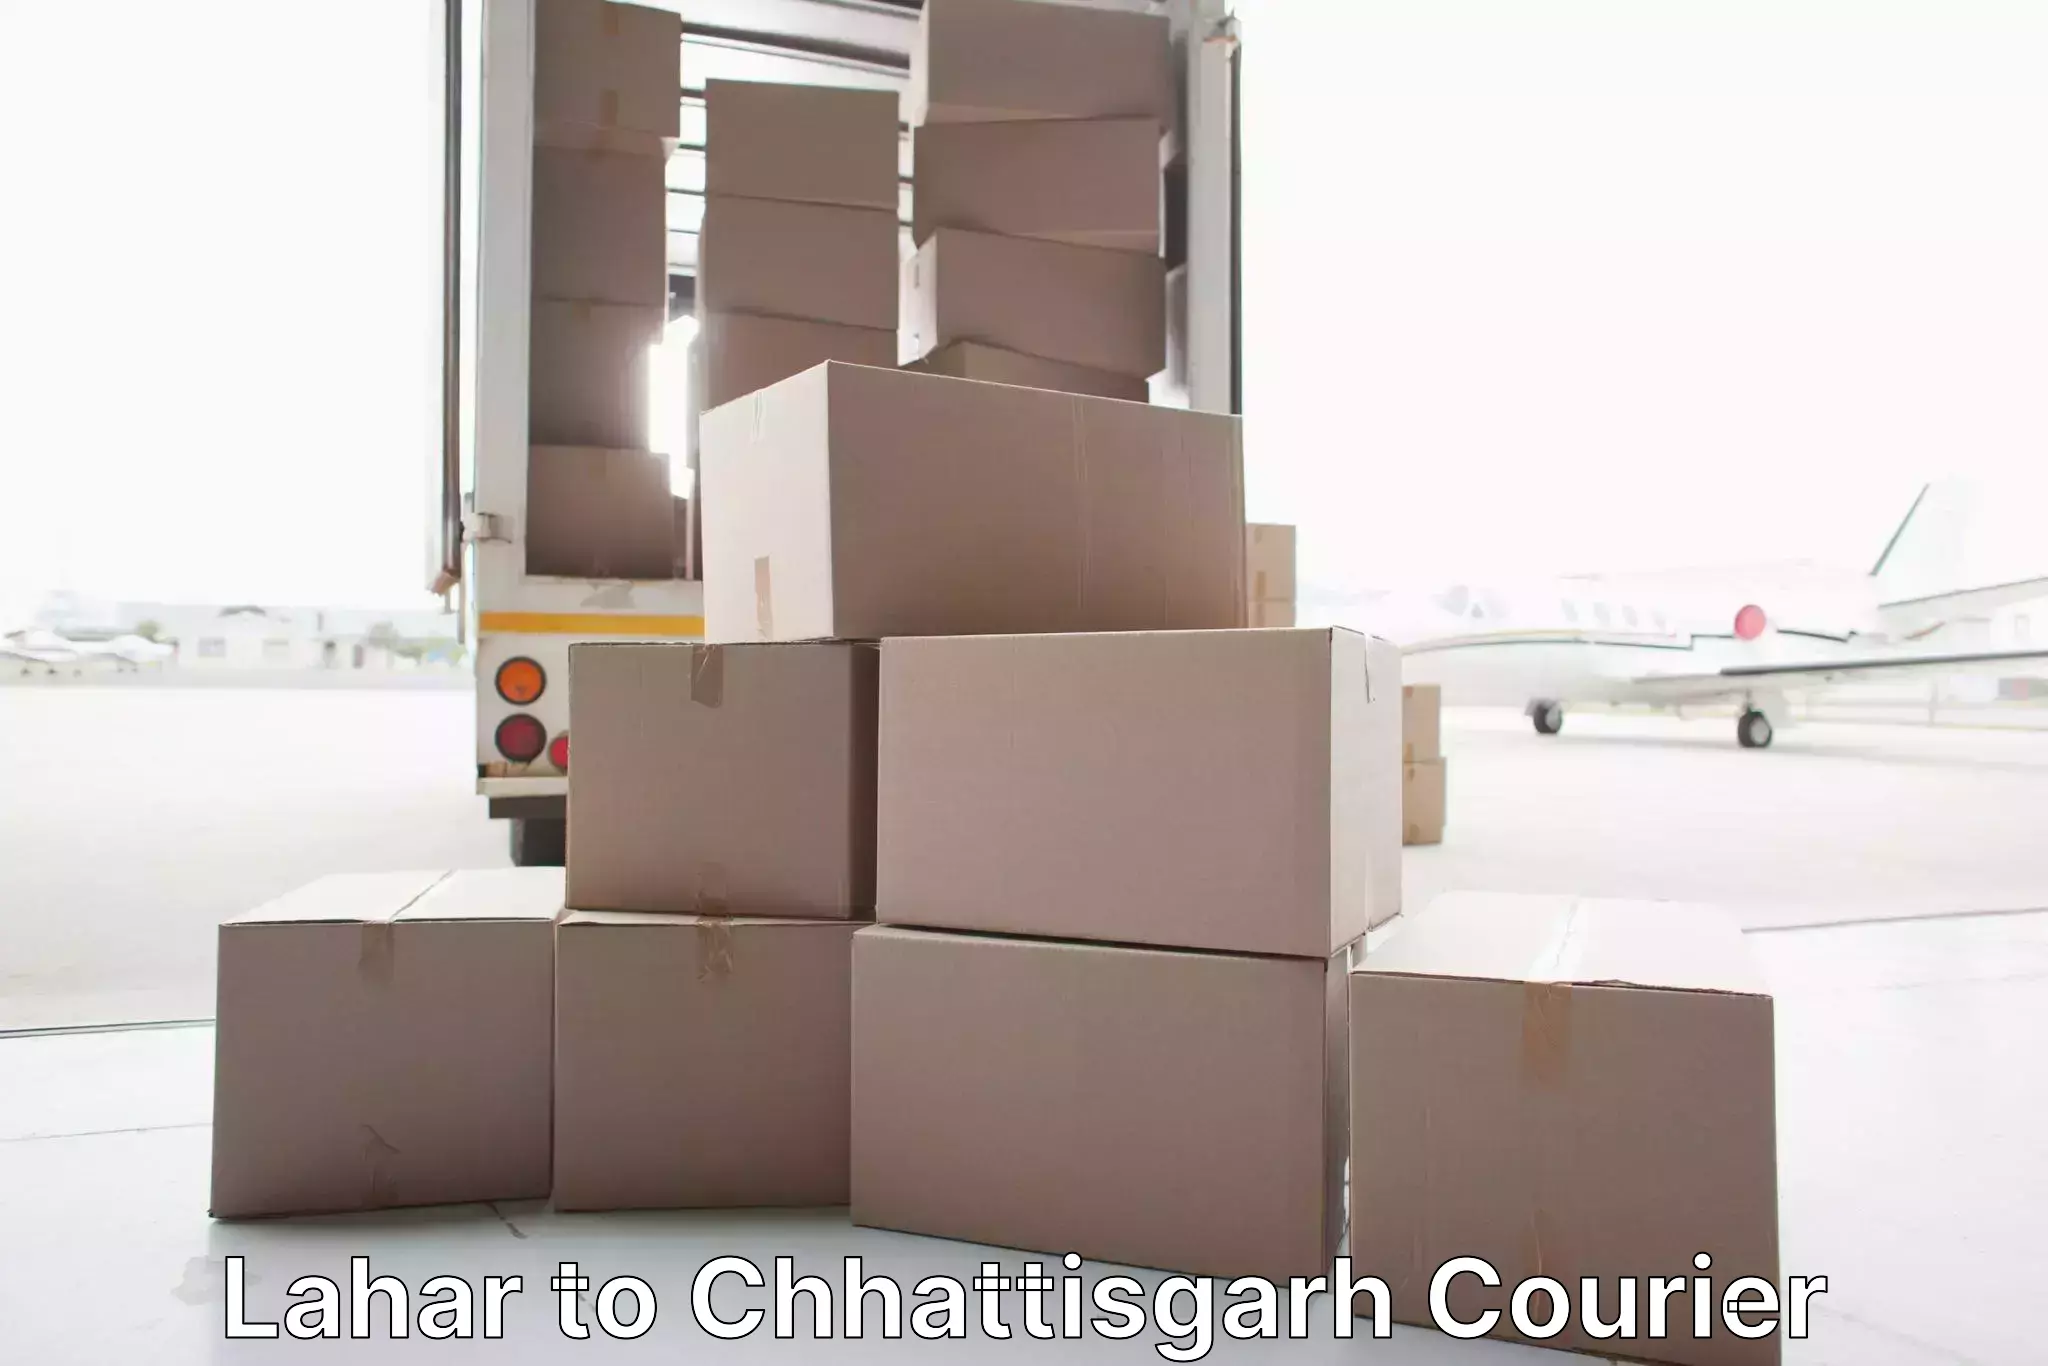 Moving and packing experts Lahar to Korea Chhattisgarh